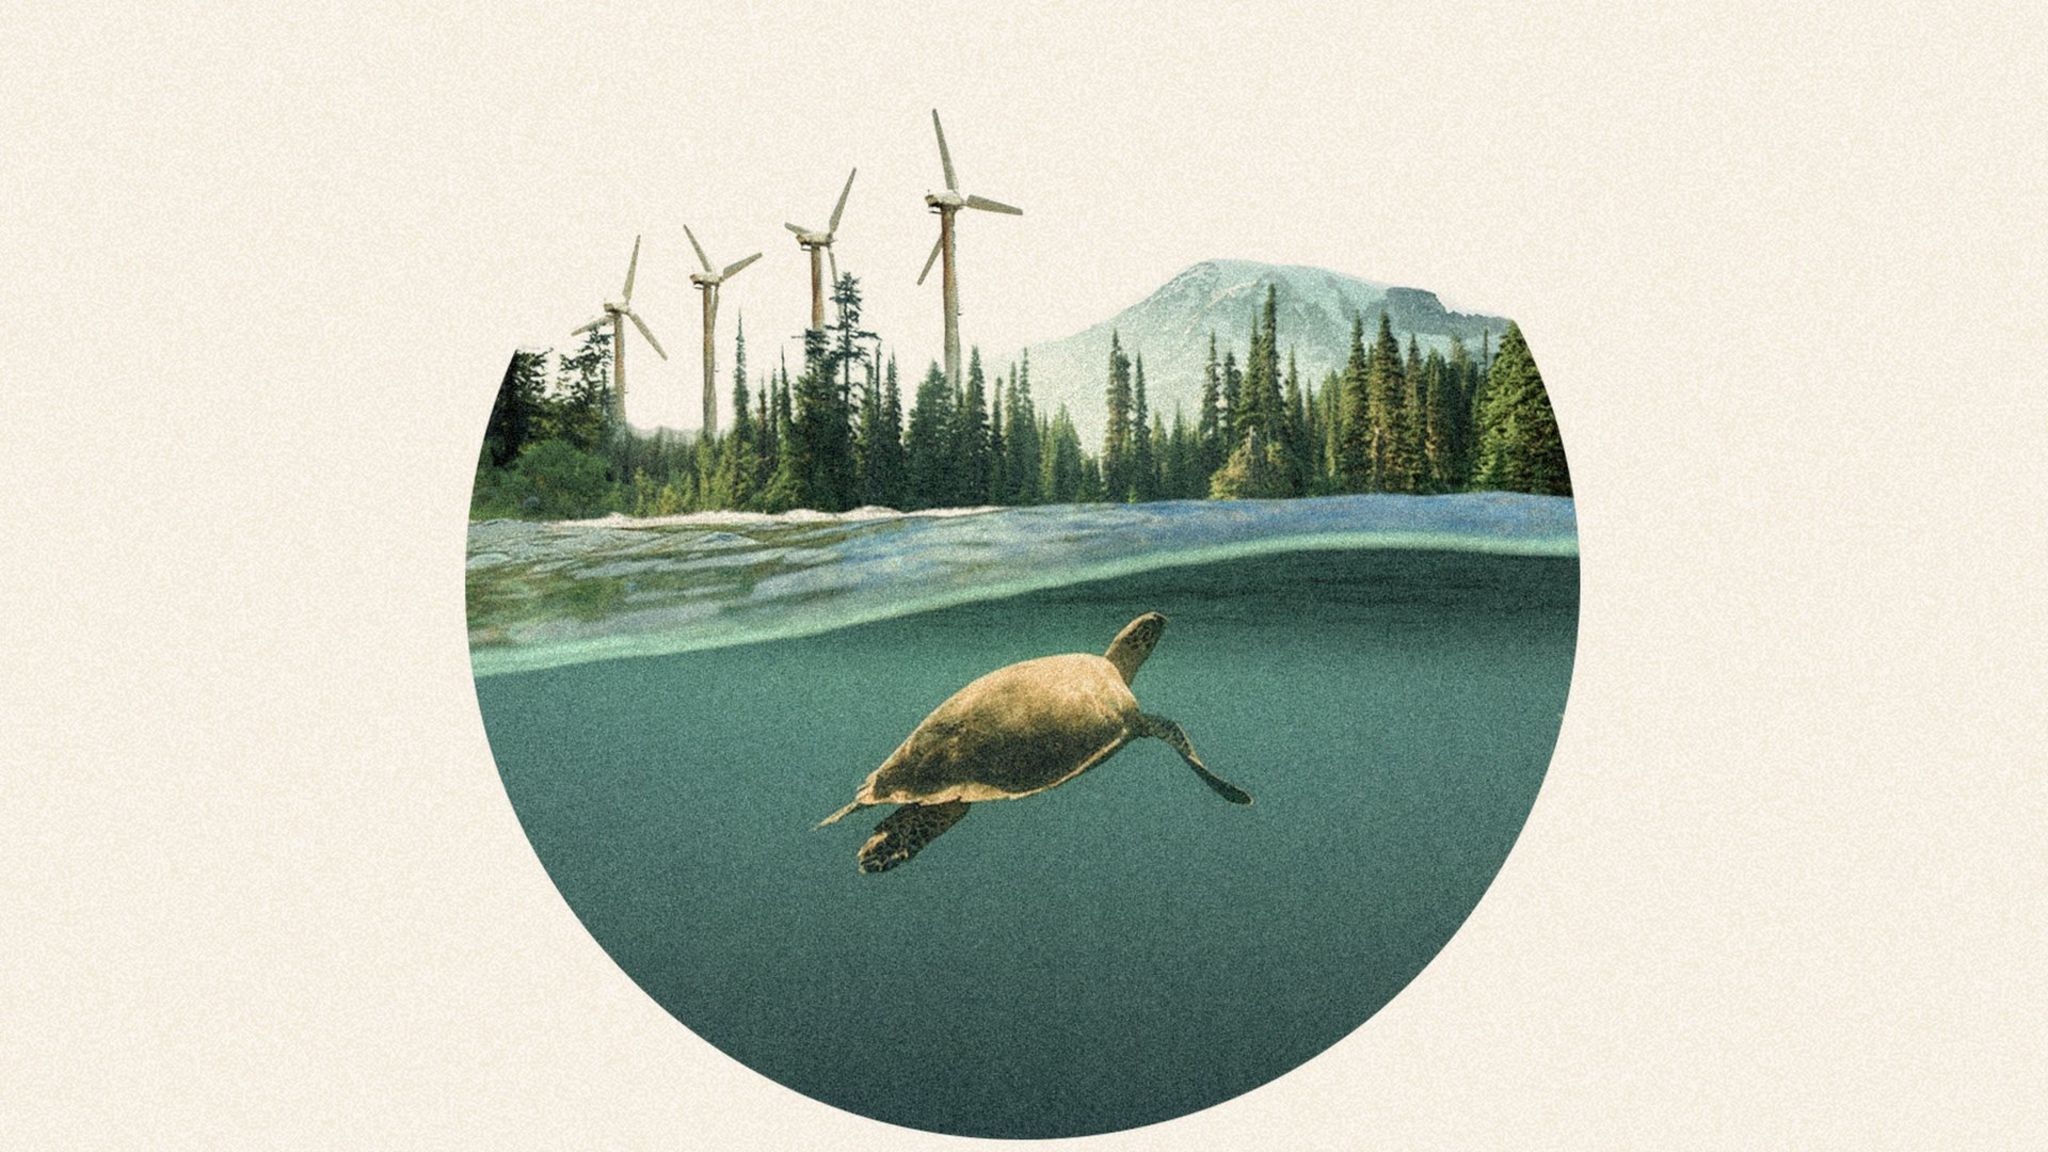 Future Earth newsletter promotional image, featuring composite shots of a turtle swimming against a backdrop of forests, mountains and wind turbines